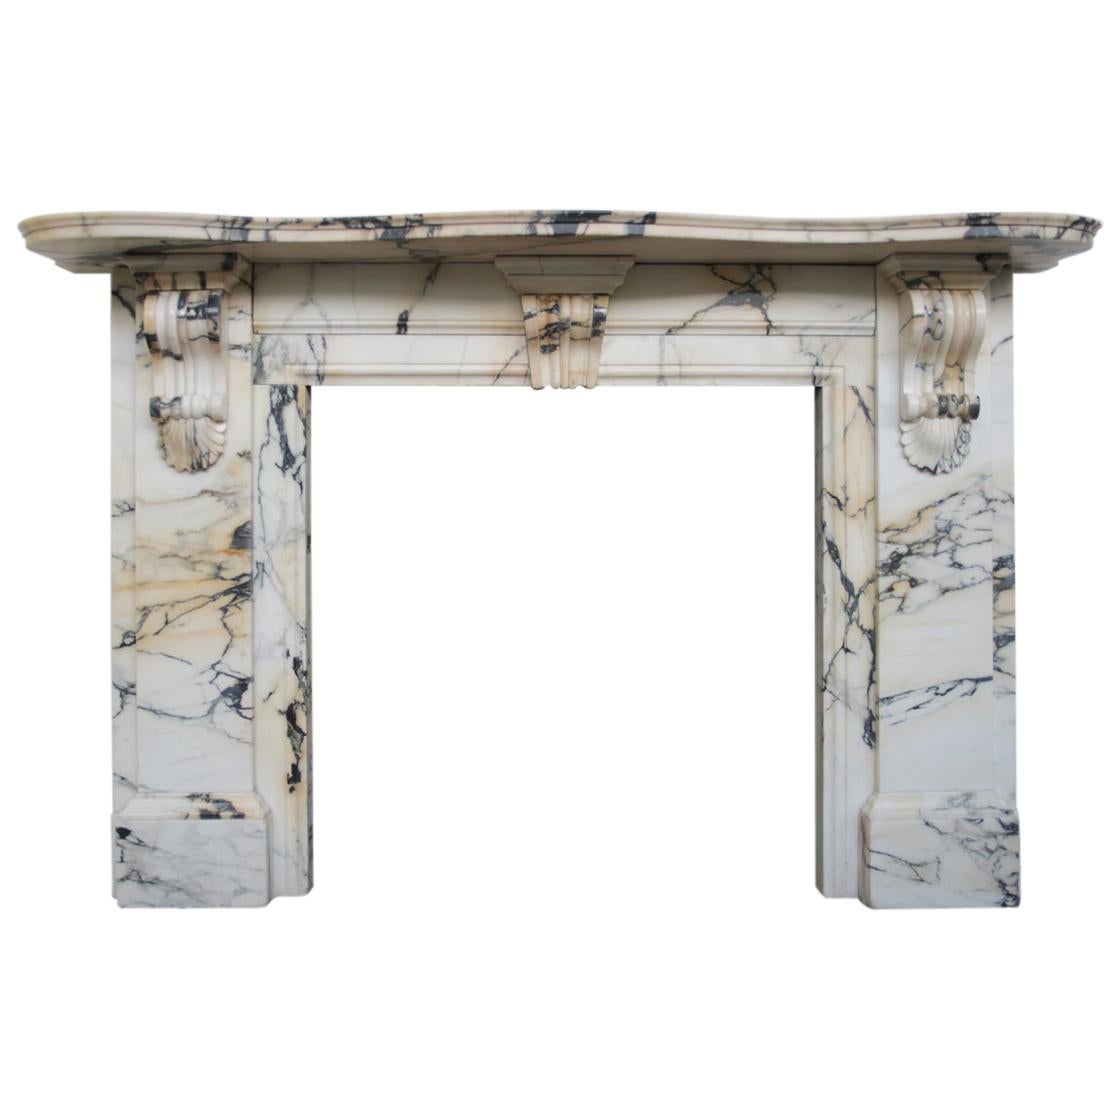 Substantial Antique Victorian Fire Surround in Arabescato Marble